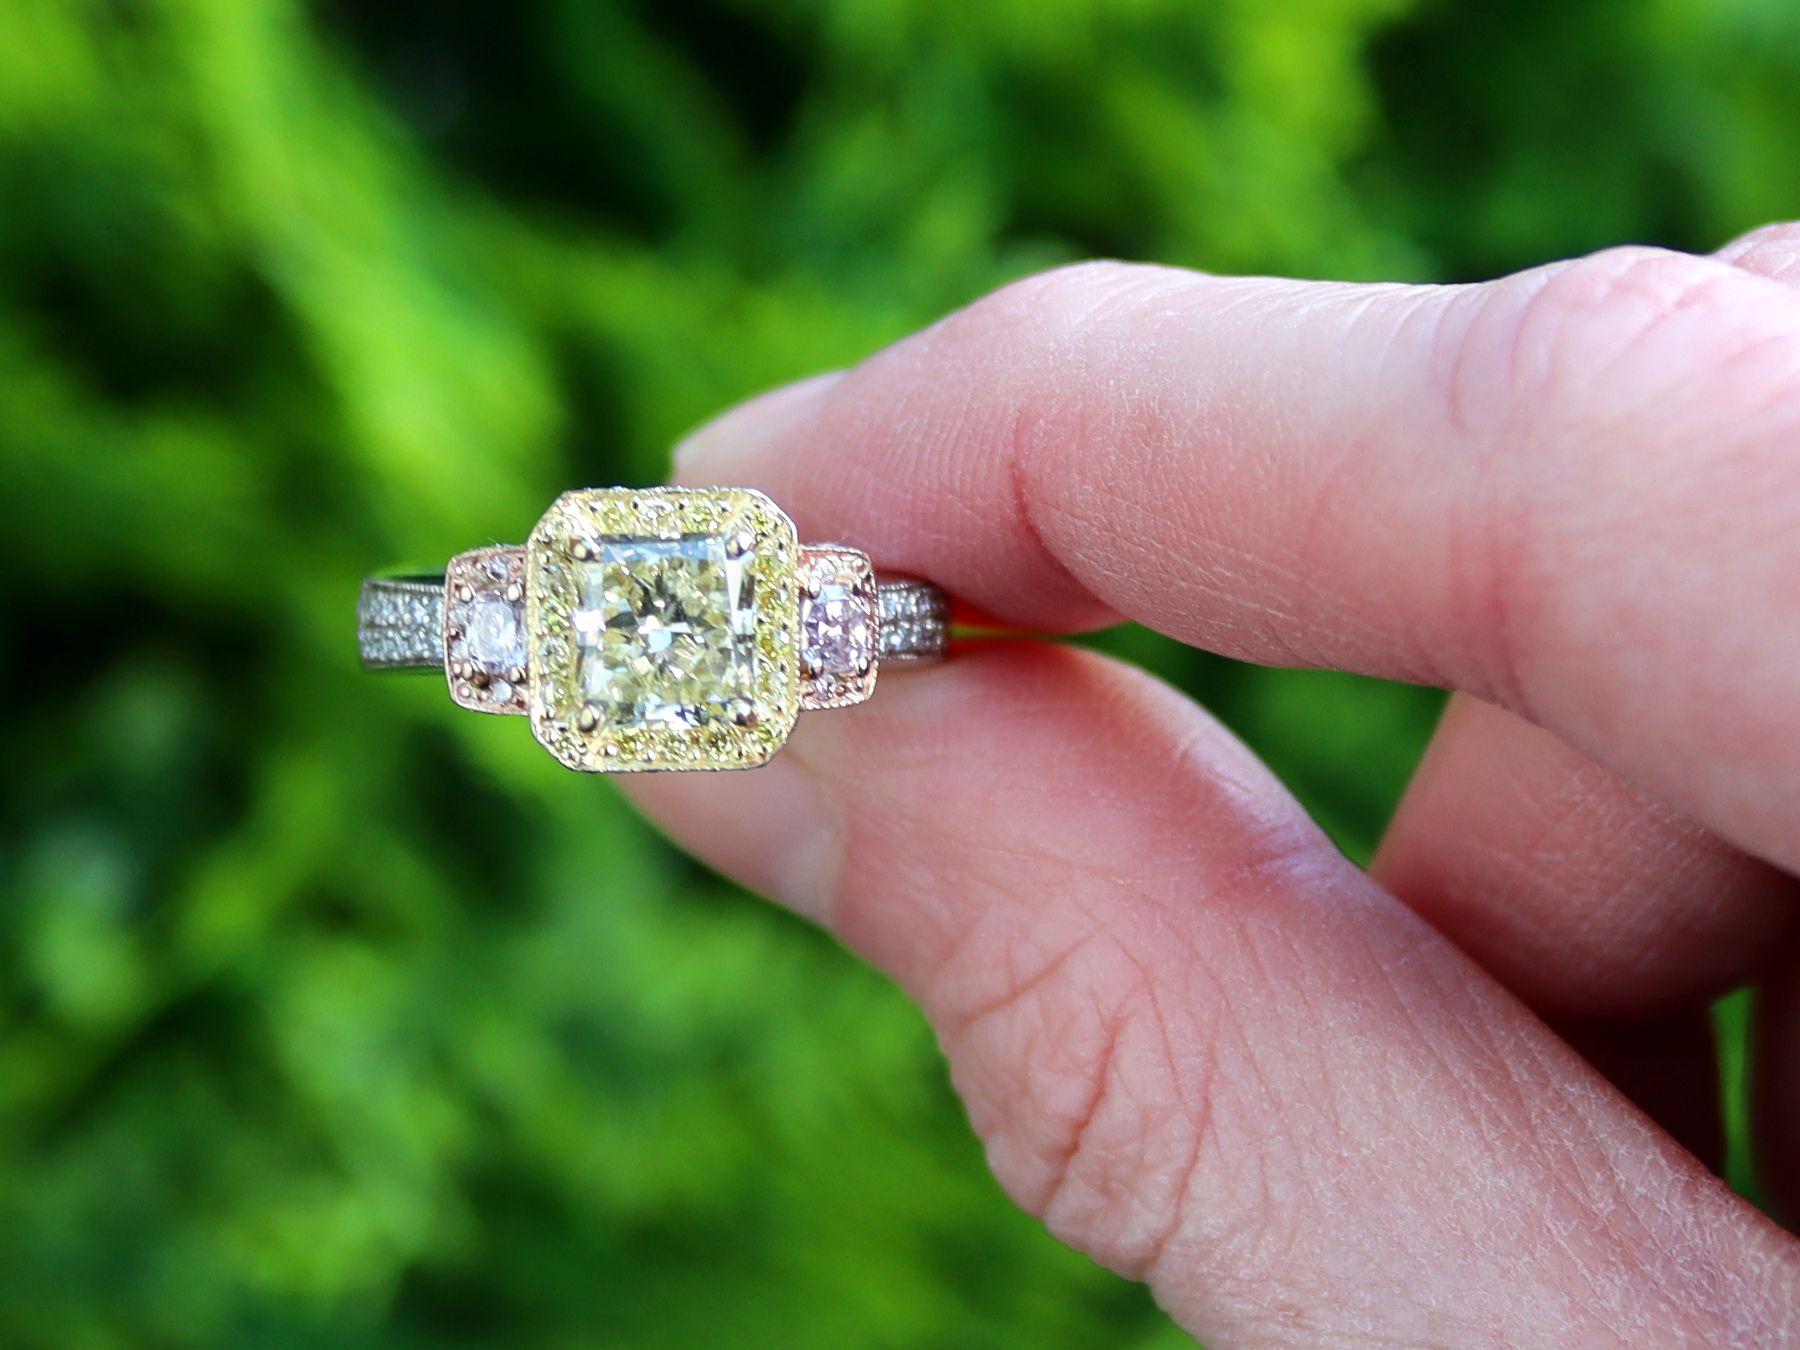 A stunning, fine and impressive contemporary 3.06 carat yellow and pink diamond engagement ring in platinum, multi-toned gold set ring; part of our diverse diamond ring collections

This magnificent antique diamond ring has been crafted in platinum,